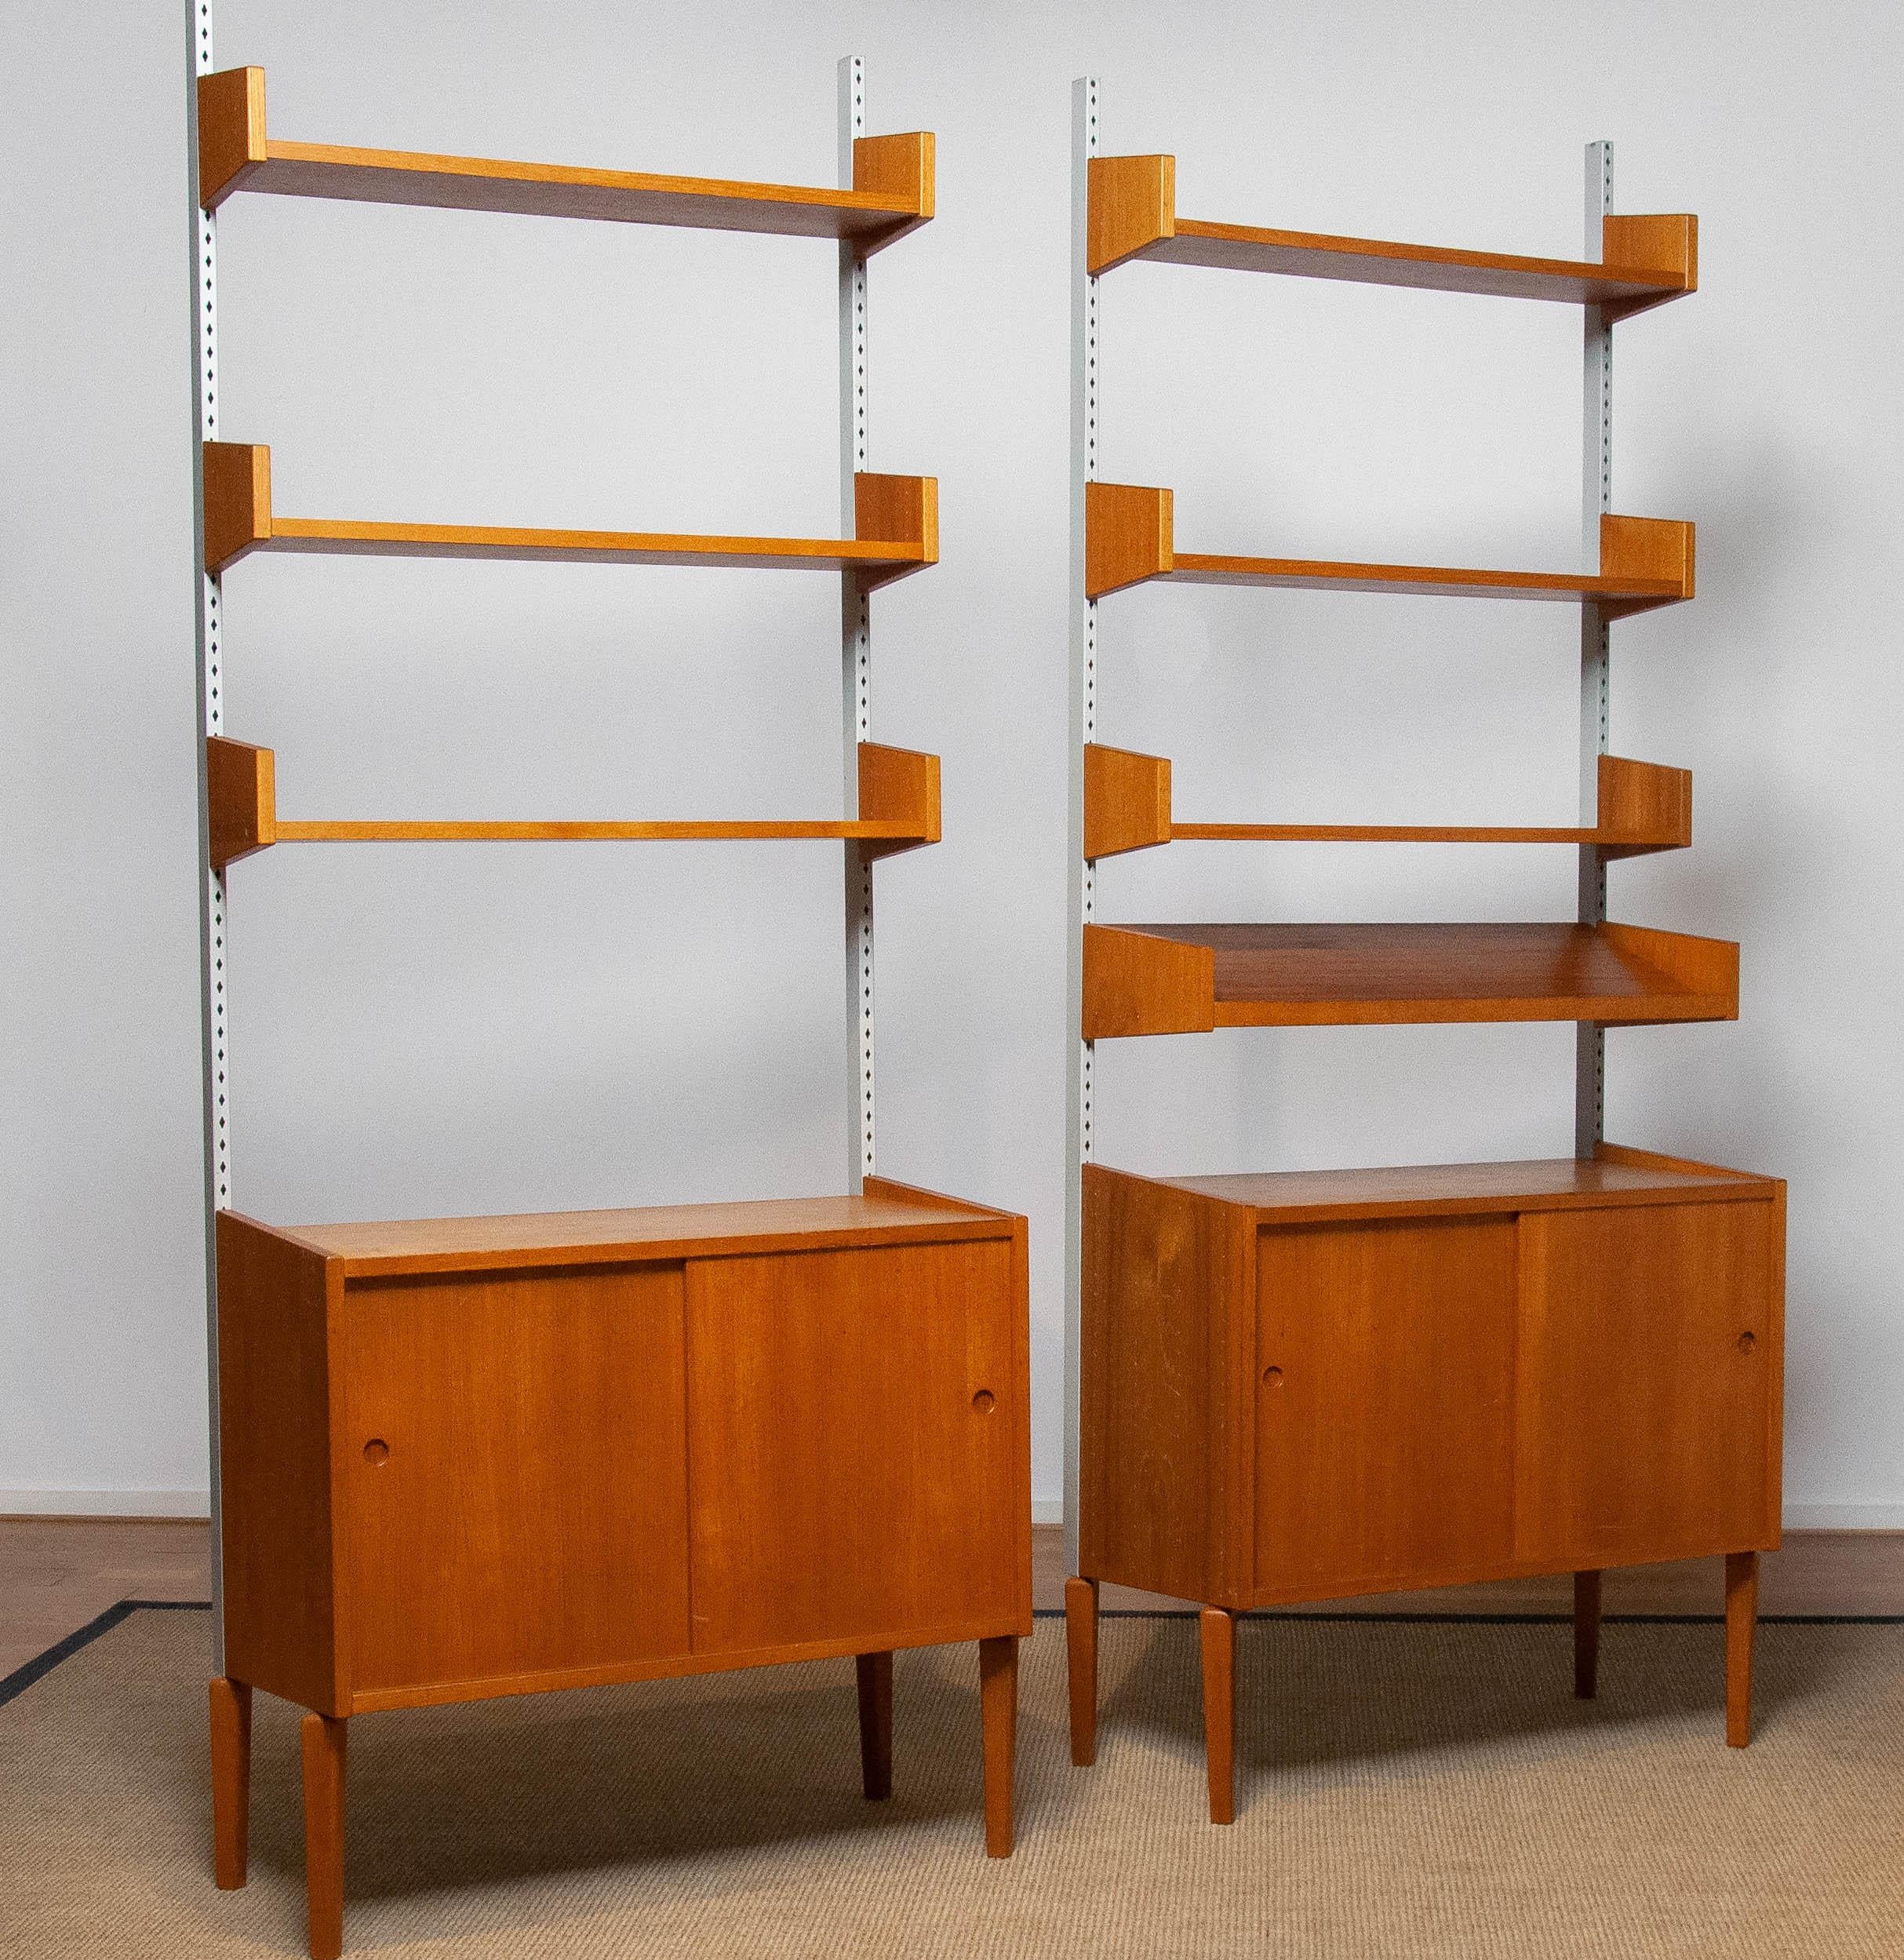 Pair Teak Shelf Systems Bookcases with Steel Bars by Harald Lundqvist for Lizzy 1